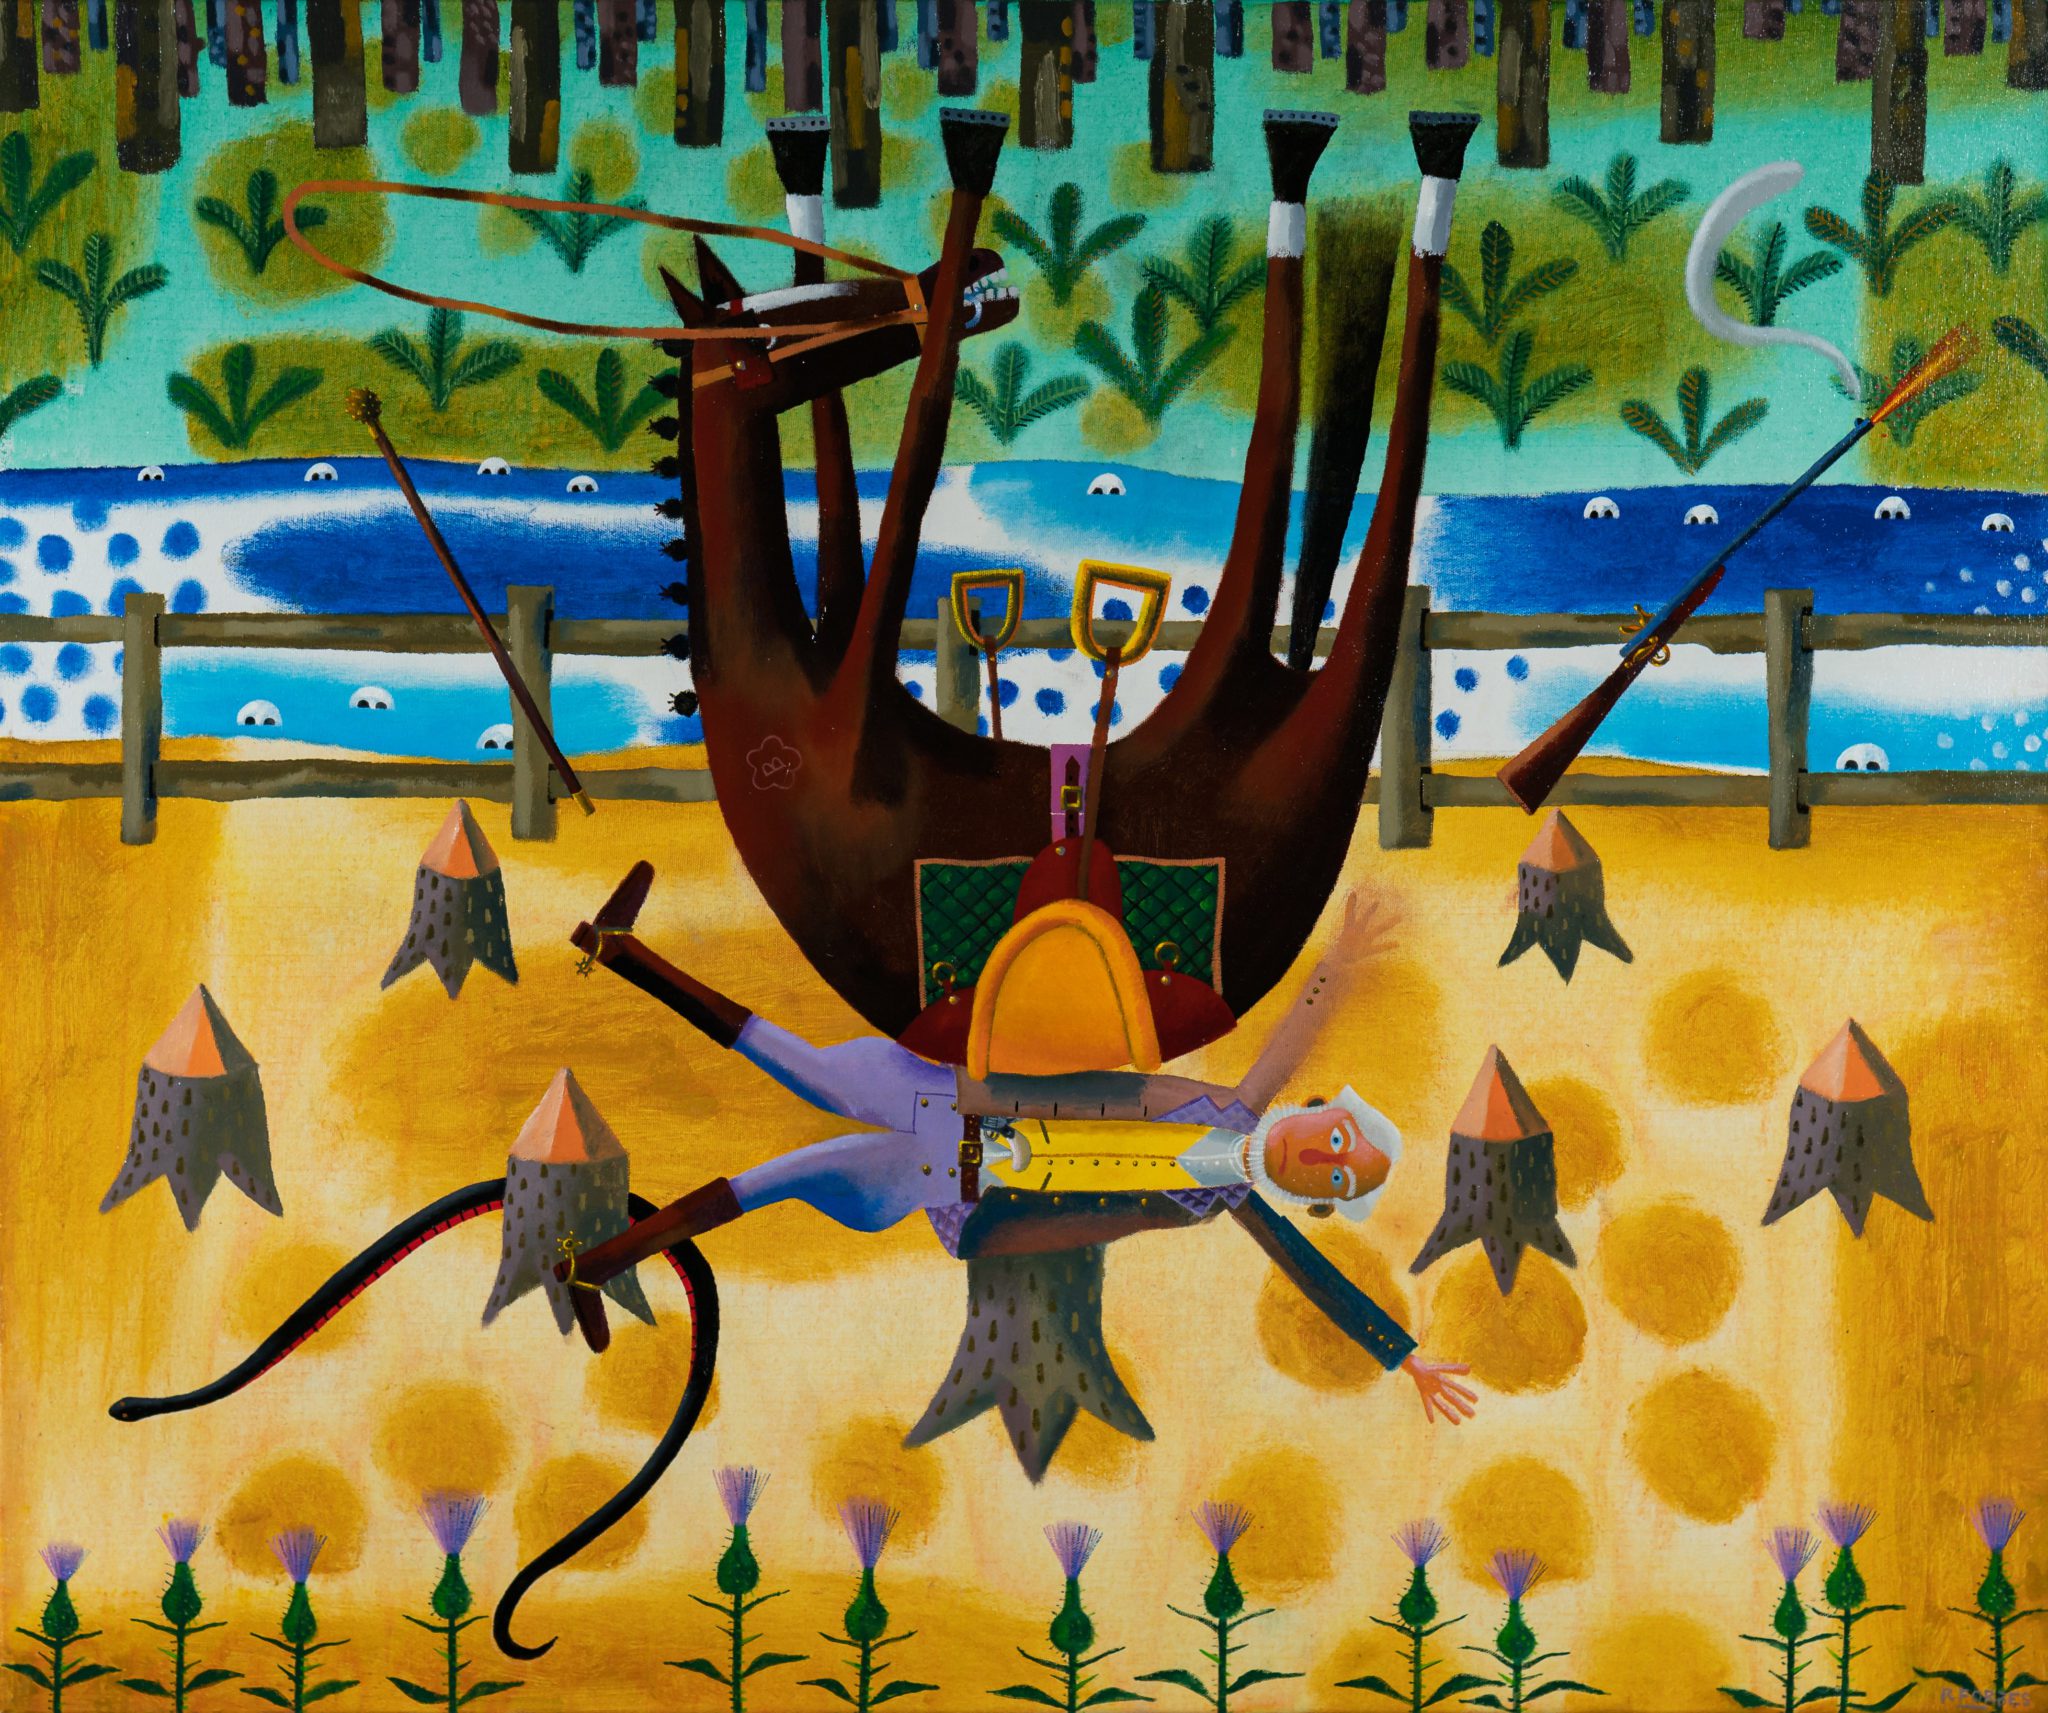 Rodney Forbes, Death of Angus McMillan, 2014, Oil on canvas, 77 x 92 cm, Latrobe Regional Gallery Collection, gift of the artist through the Australian Government’s Cultural Gift program, 2021.